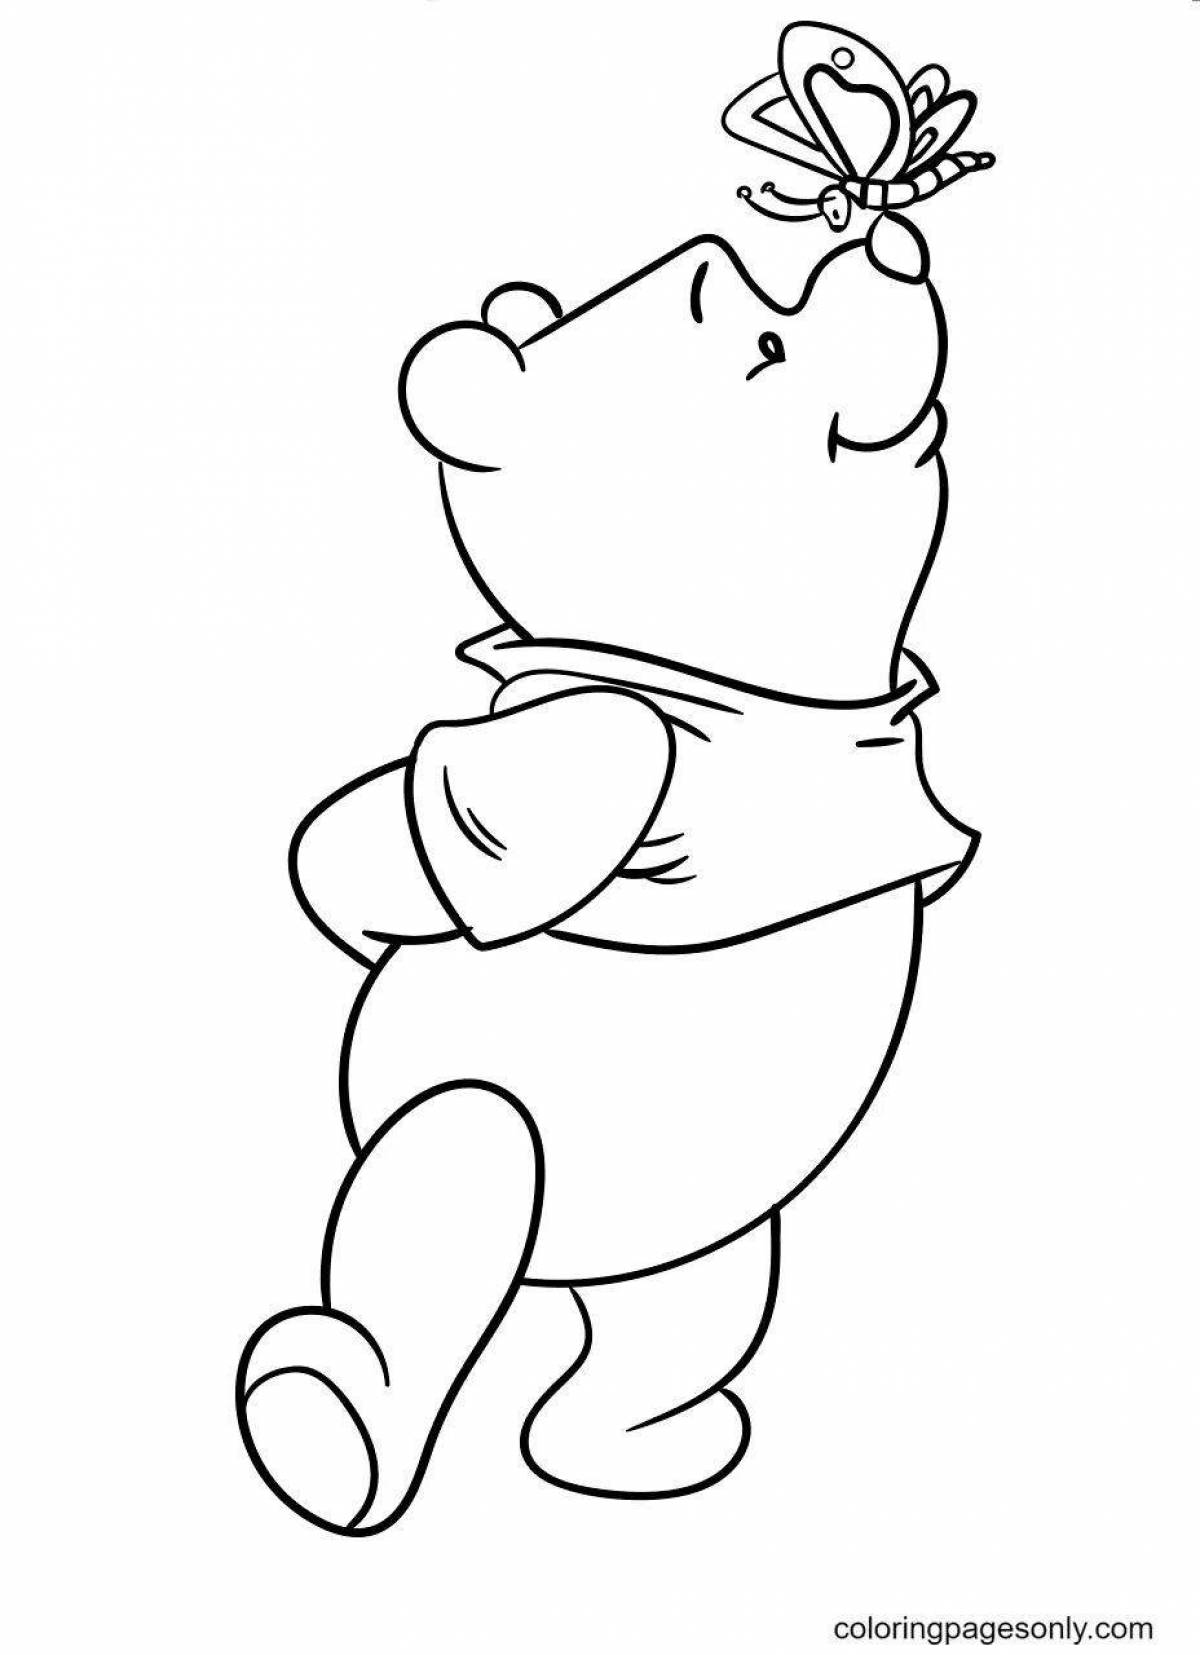 Winnie the pooh wonderful coloring book for kids